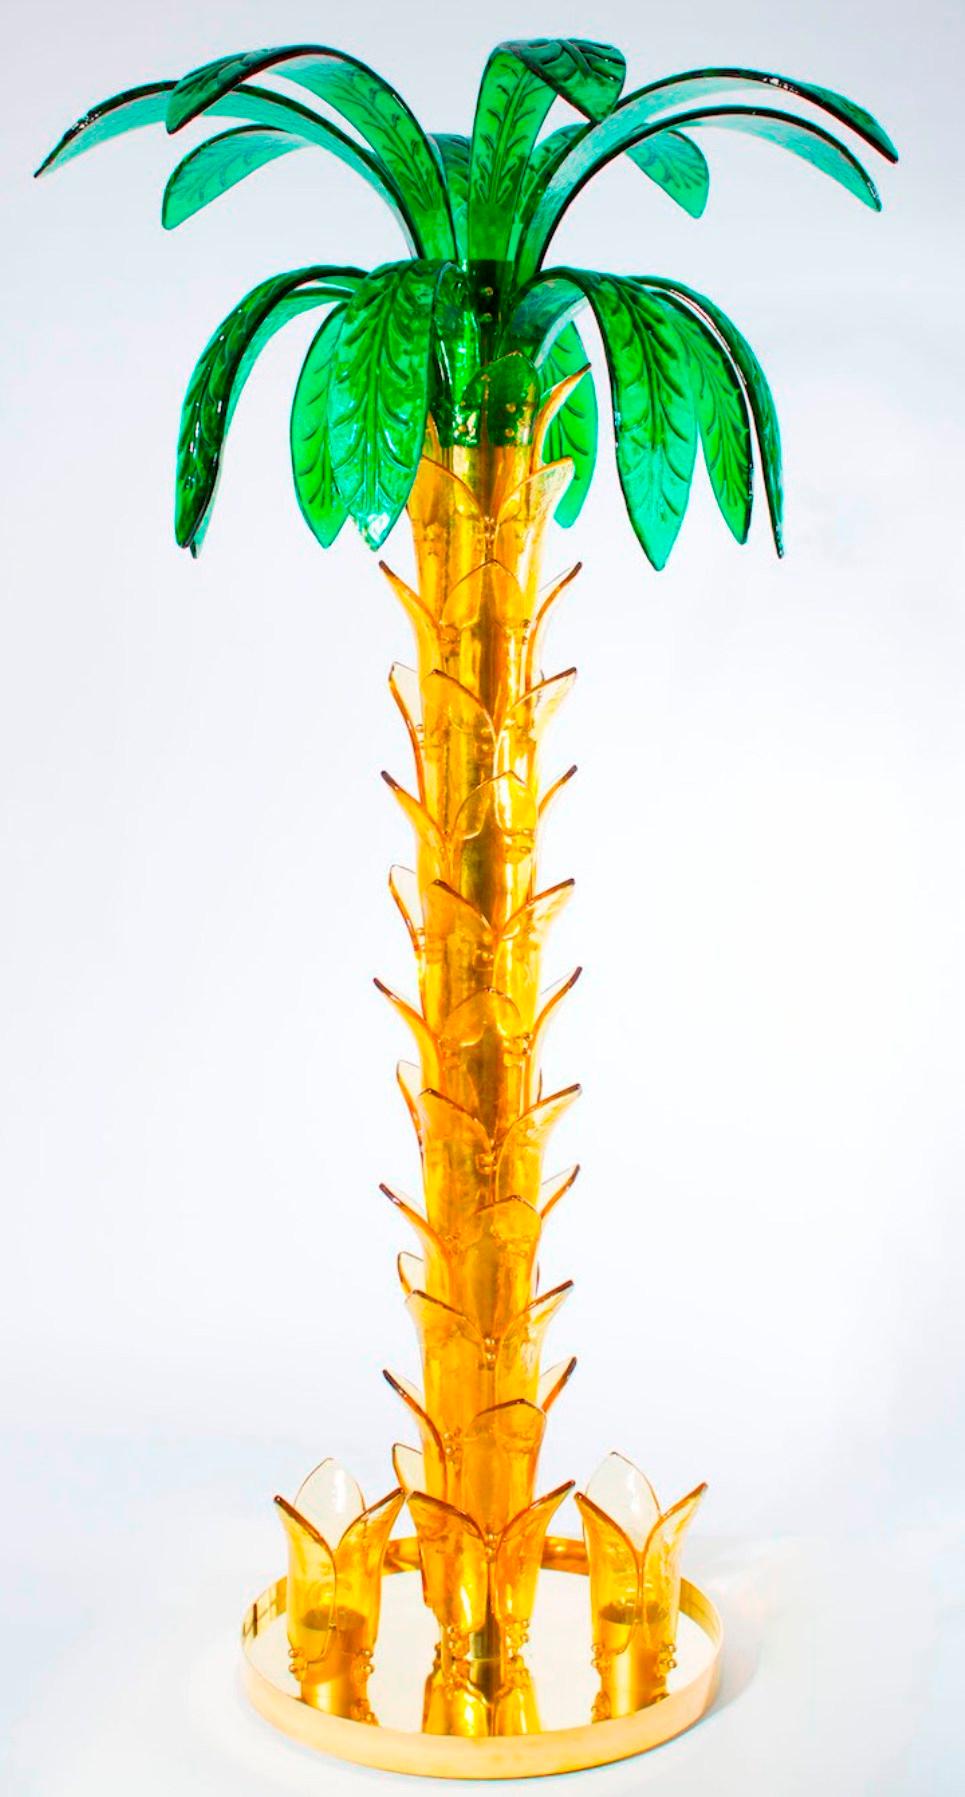 Palm floor lamp in Murano glass amber and green vintage Murano gallery, Contemporary, 21st century
Italian palm-shaped floor lamp in blown Murano glass, amber and green color, with 4-light.
At the base of this tall and elegant floor lamp, a